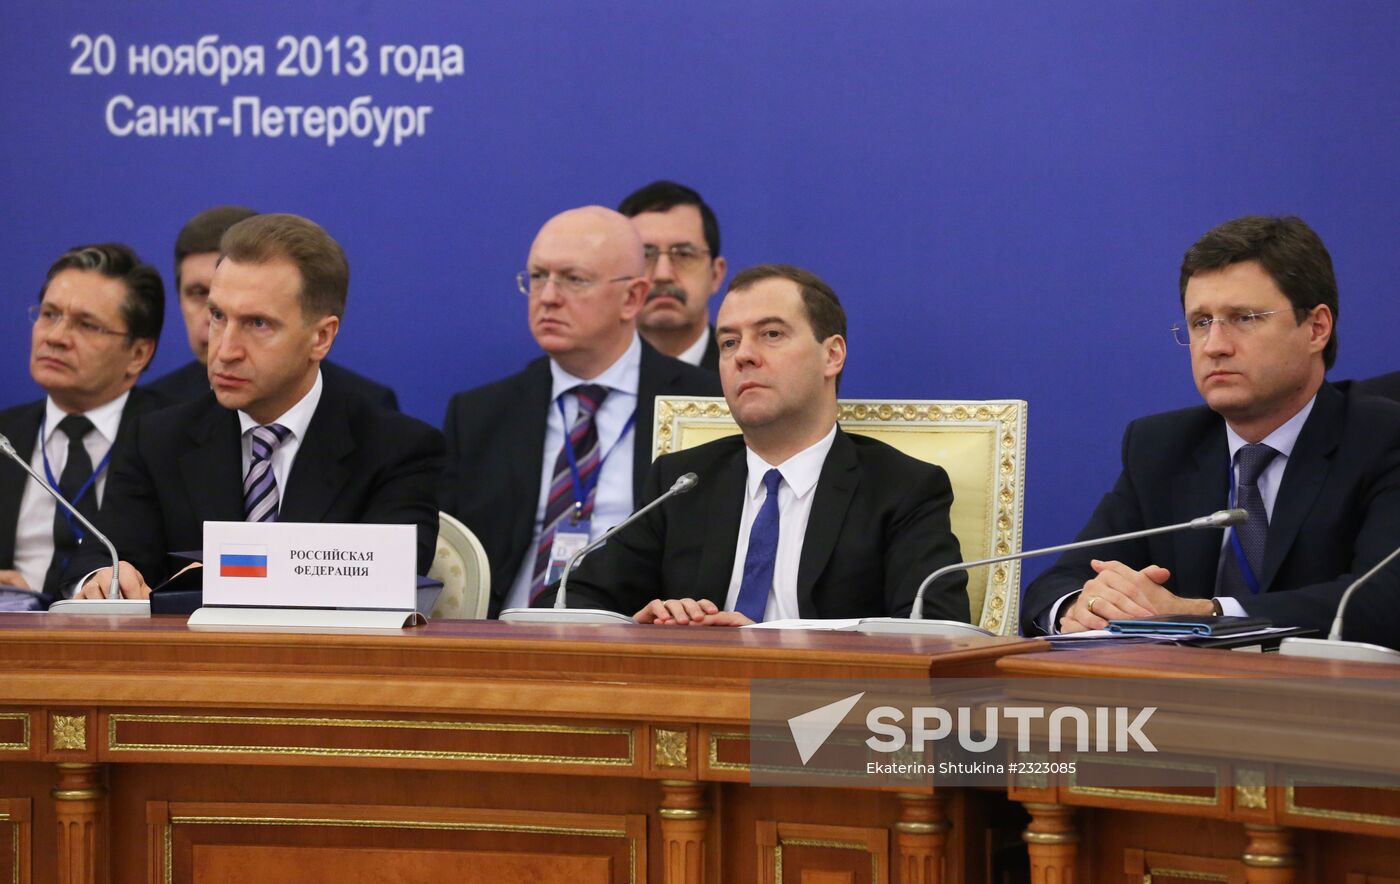 Dmitry Medvedev at CIS Heads of Government Council meeting